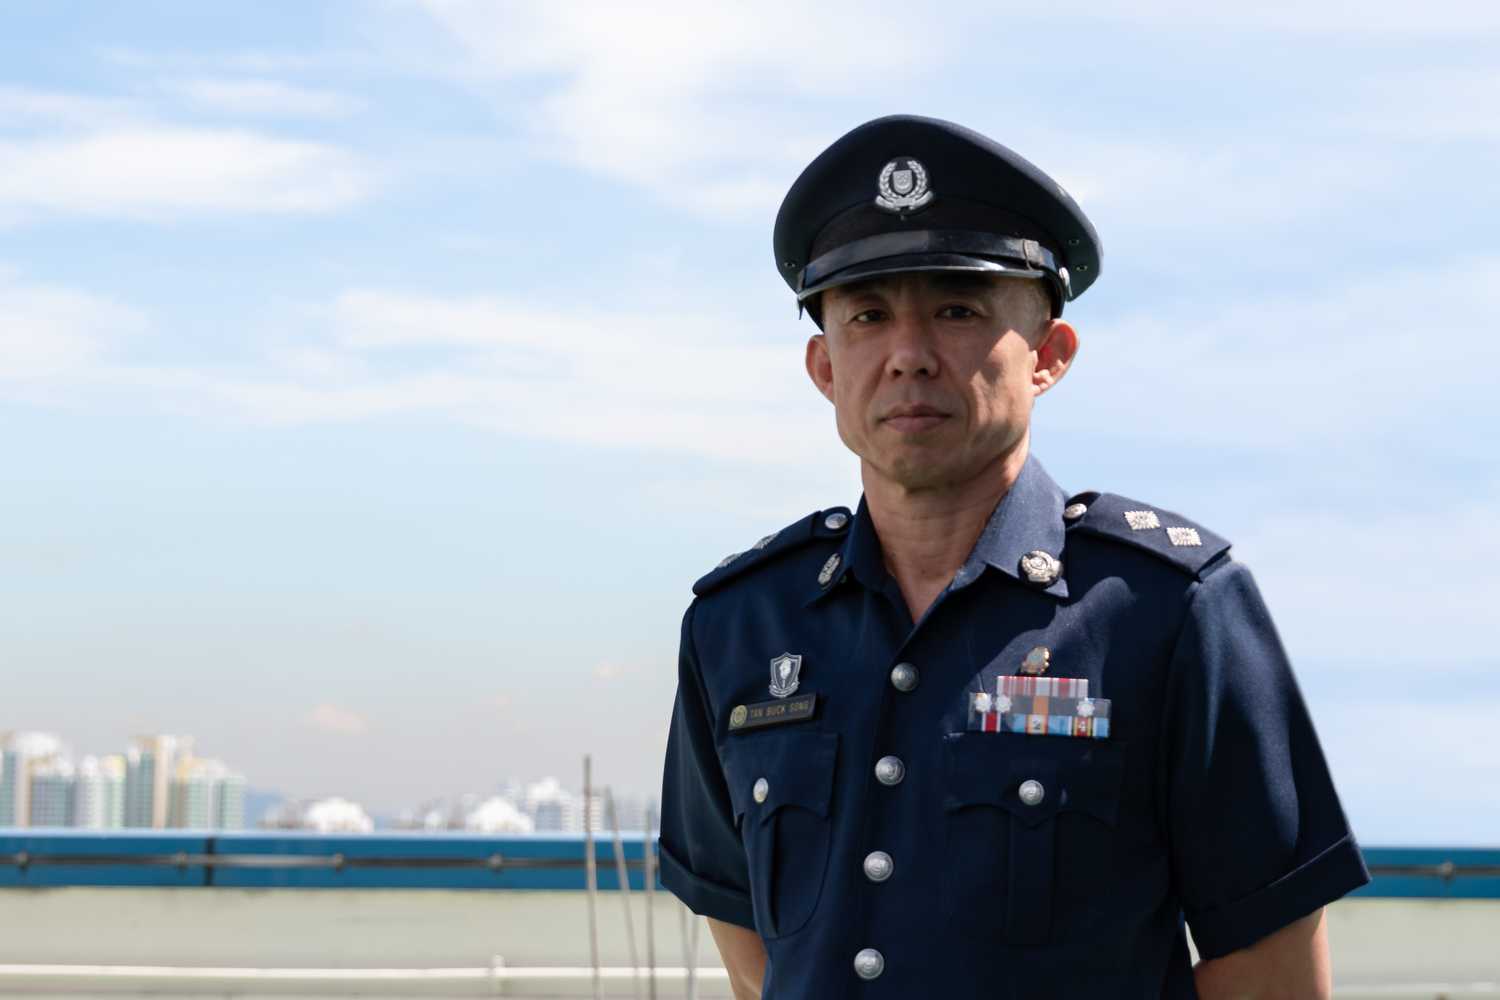 Inspector Tan Buck Song posing for the camera, wearing his Singapore Police Force uniform 3 and peak cap, against the blue sky and white clouds background. 